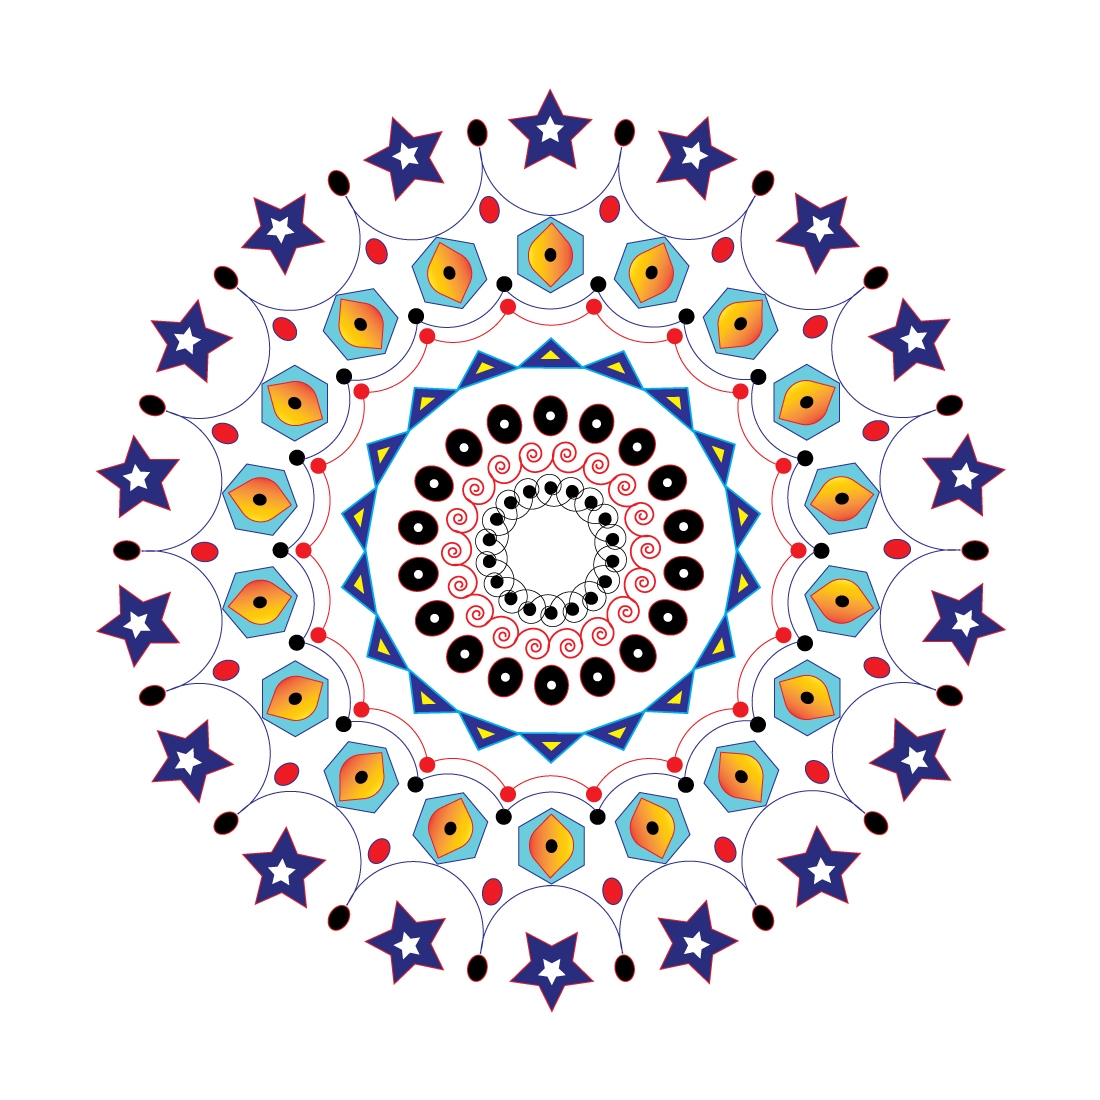 Mandala Design for your business and company identity cover image.